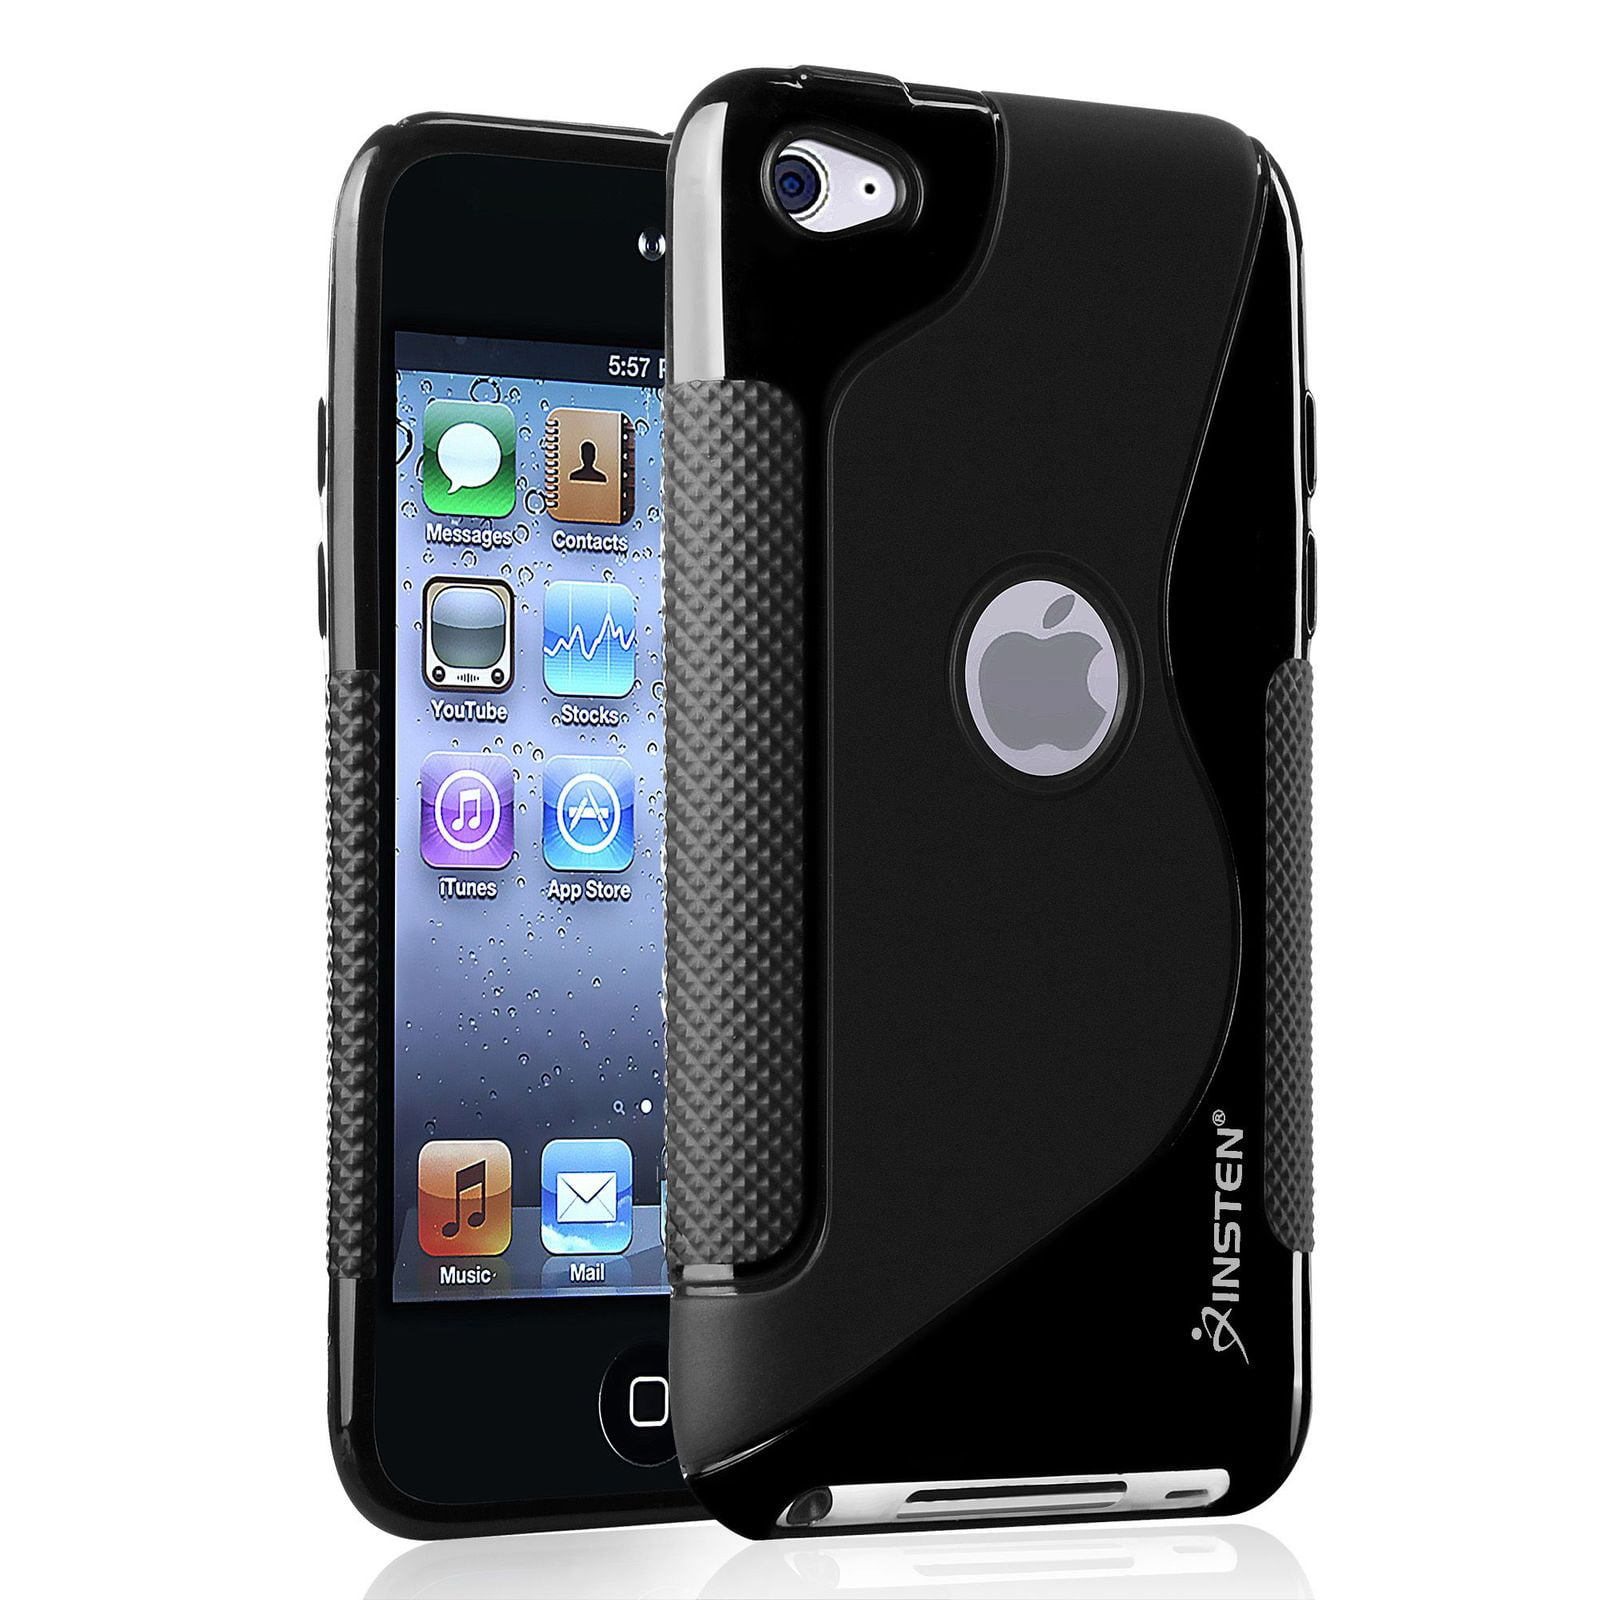 Black Tyre Skin Case for iPod Touch 2nd 3rd Gen 2G 3G iTouch Silicone Cover